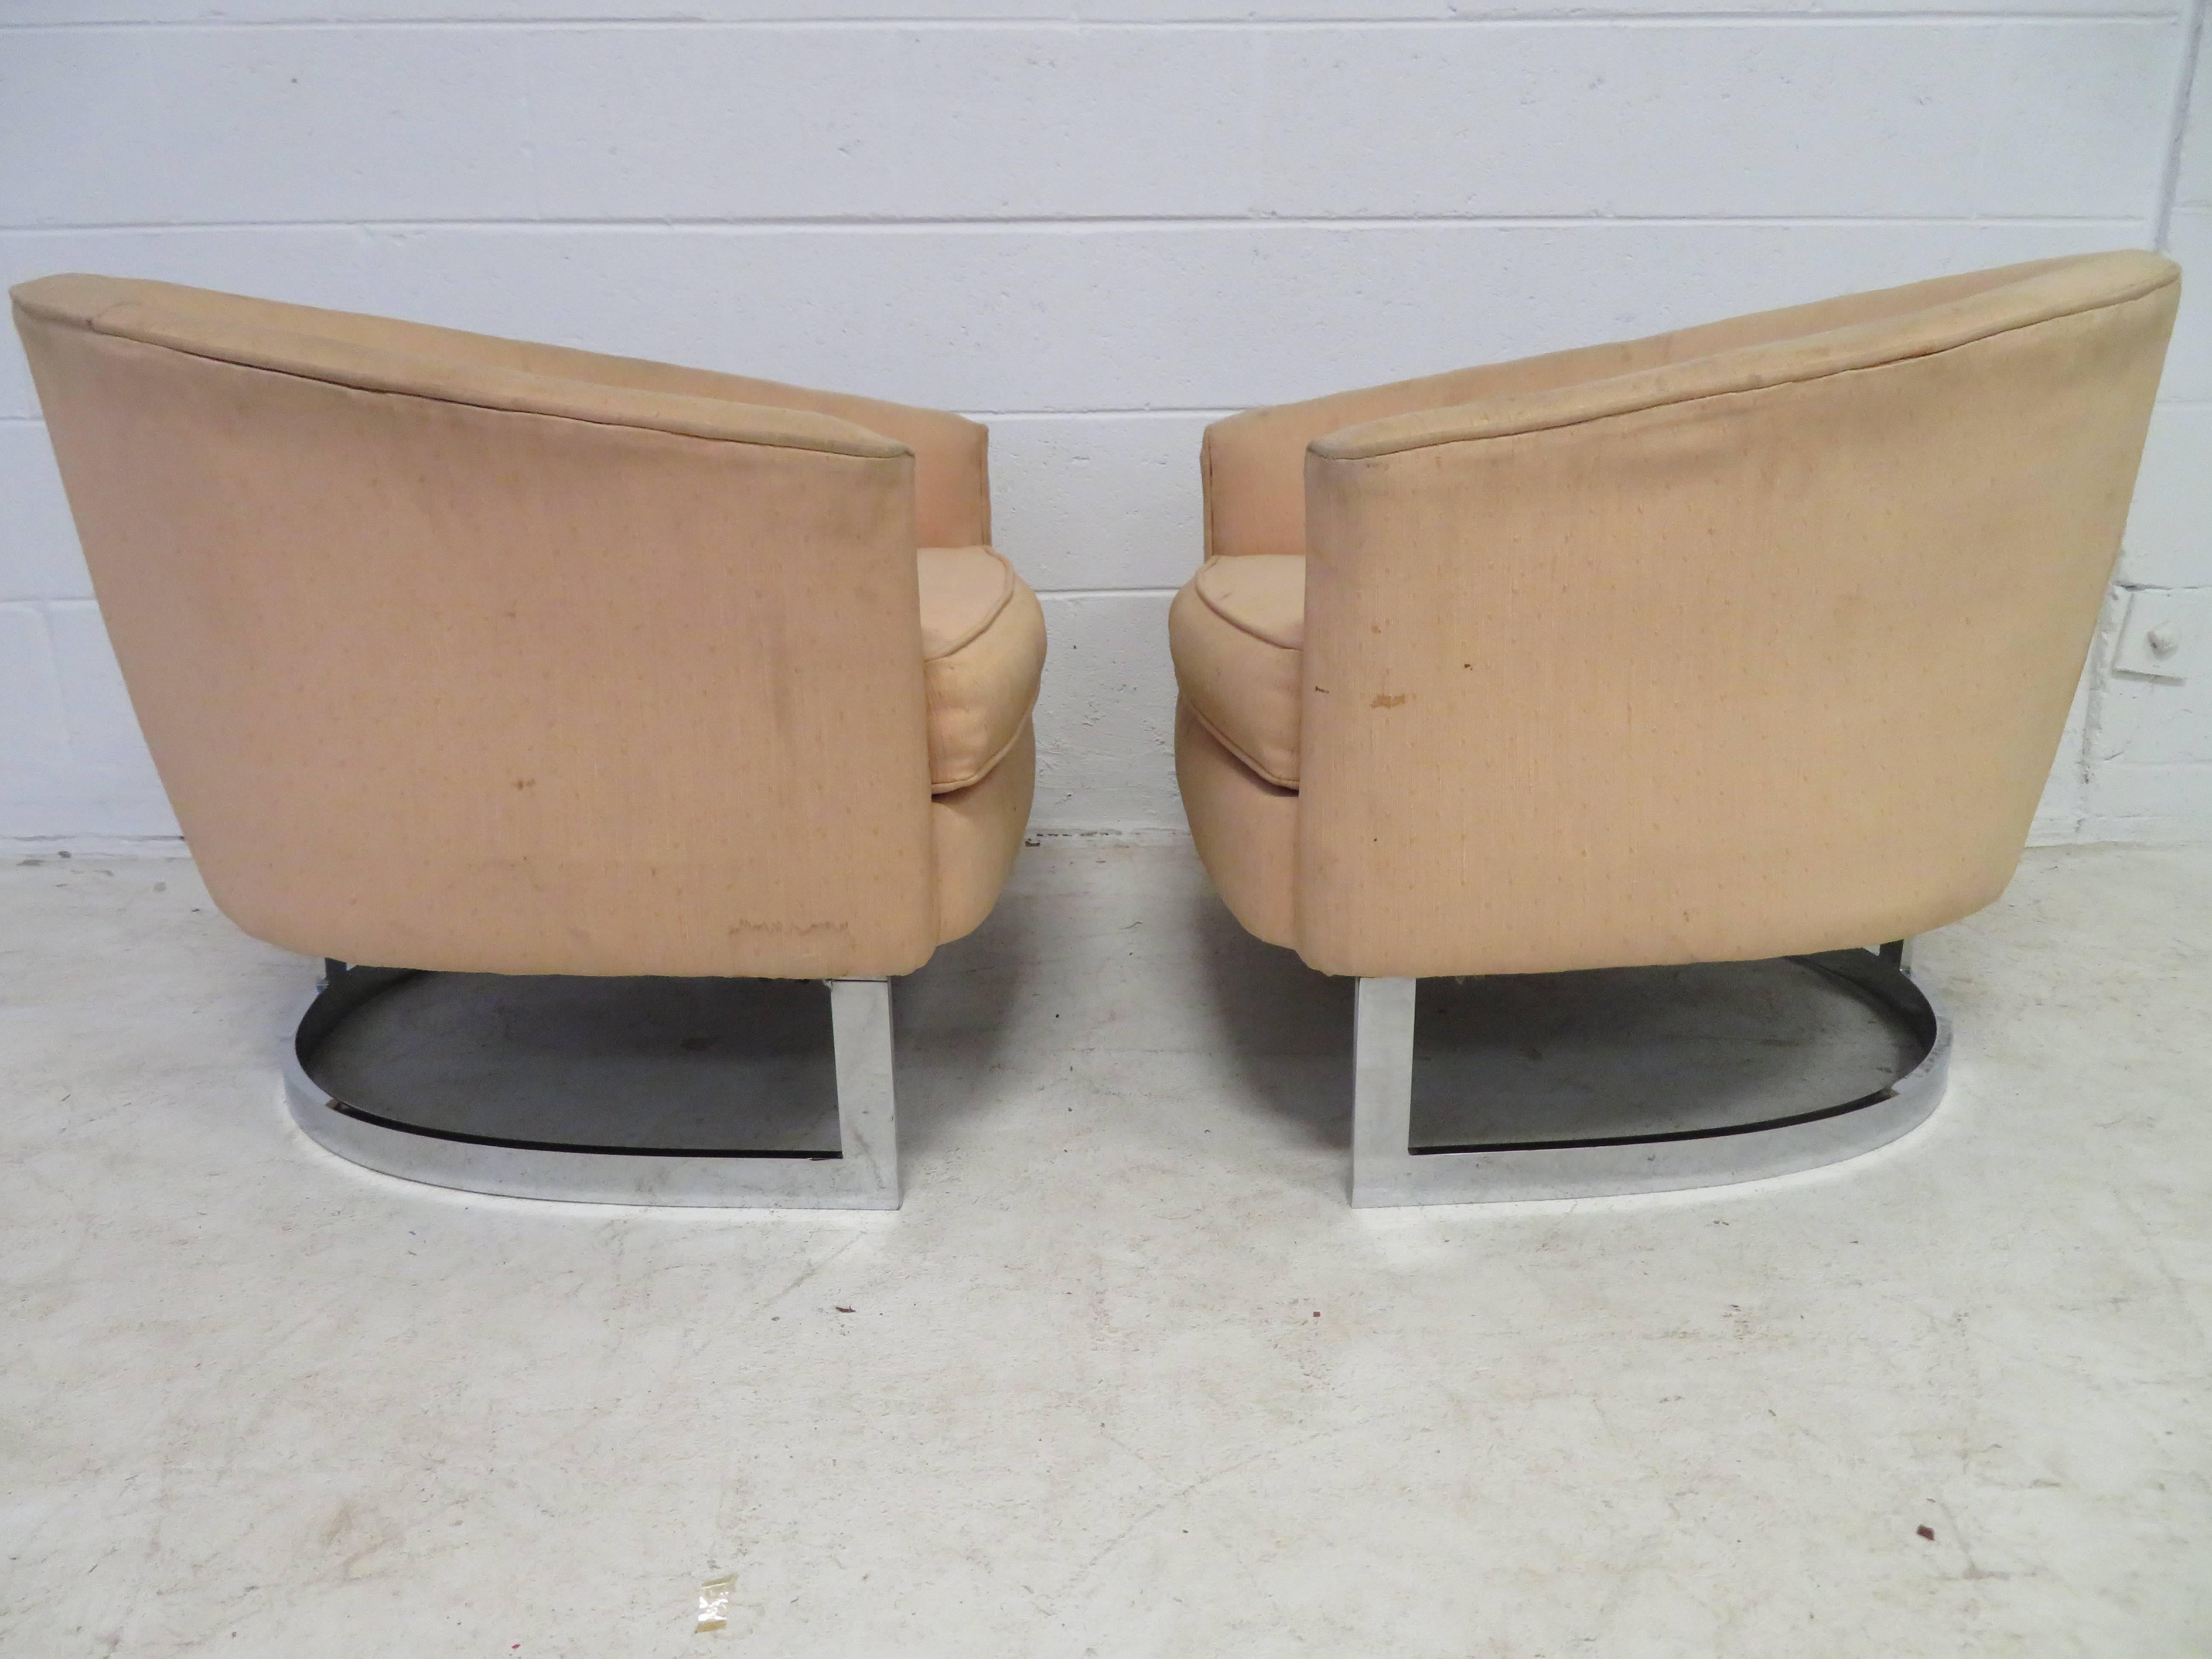 Nice pair of Milo Baughman style wide barrel back chrome base chairs. These will need reupholstery but that's what you designers are looking for anyway-right? The chrome bases look great with only some light wear.